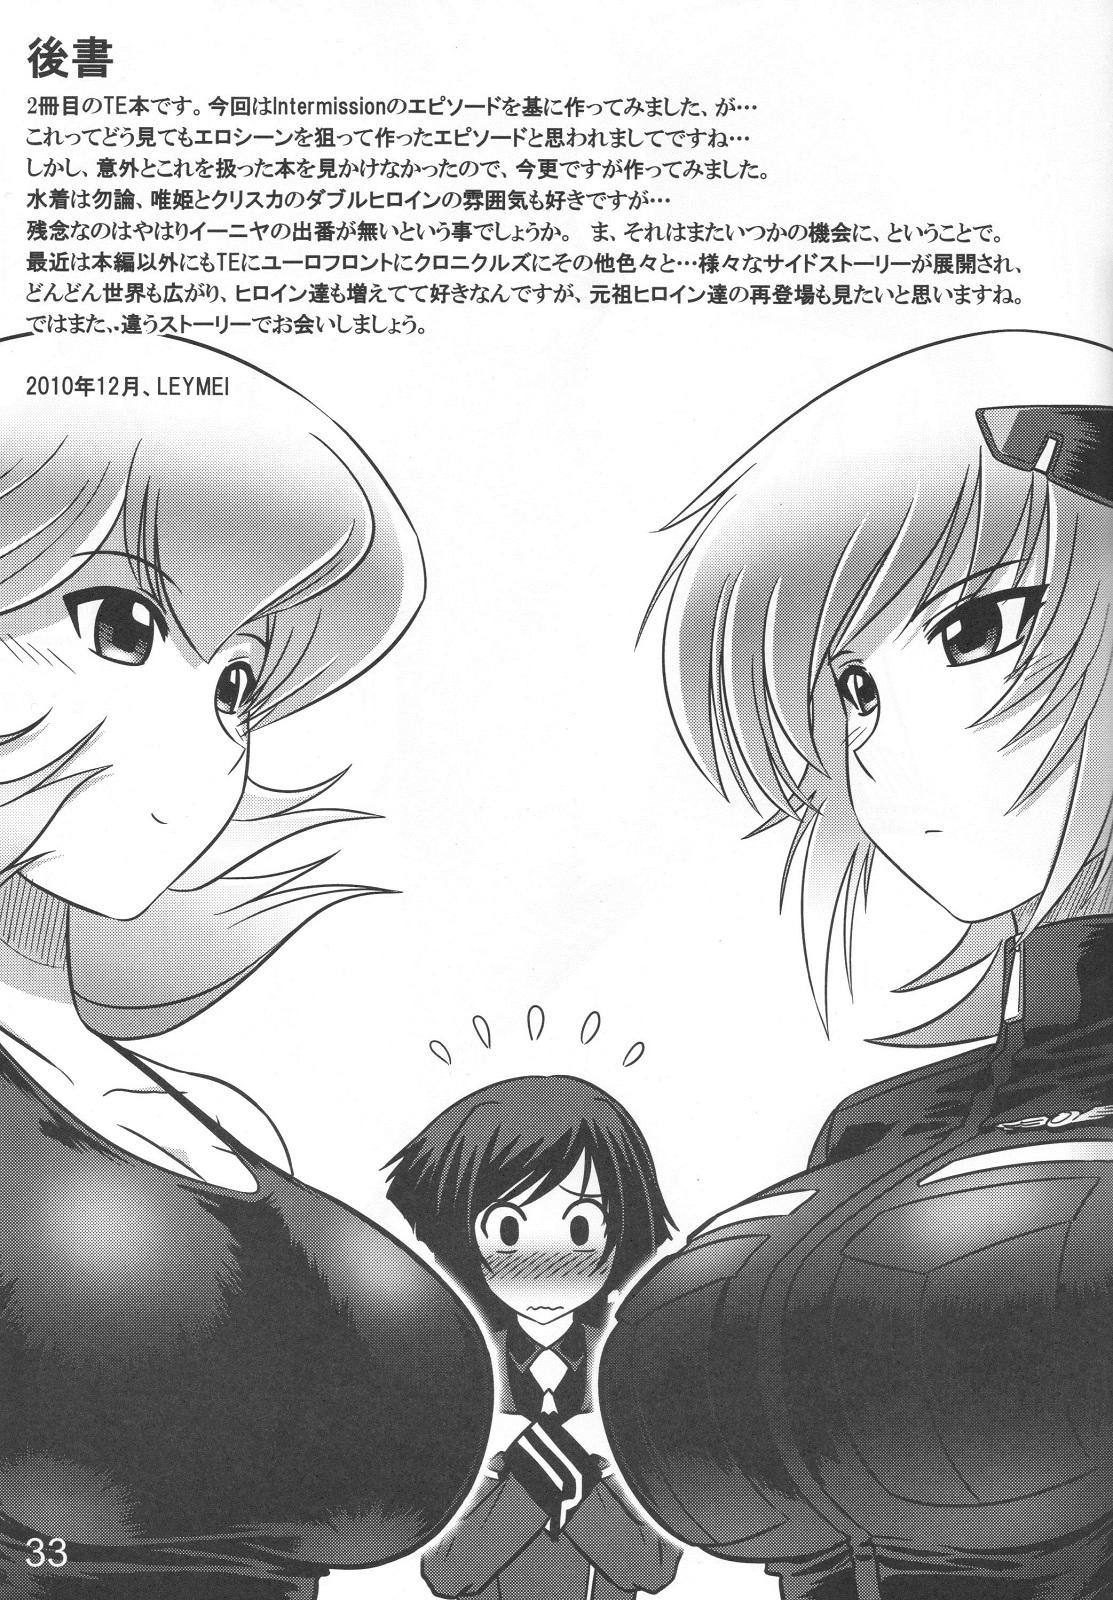 Couple Intermission H - Muv-luv alternative total eclipse Hairy Sexy - Page 33